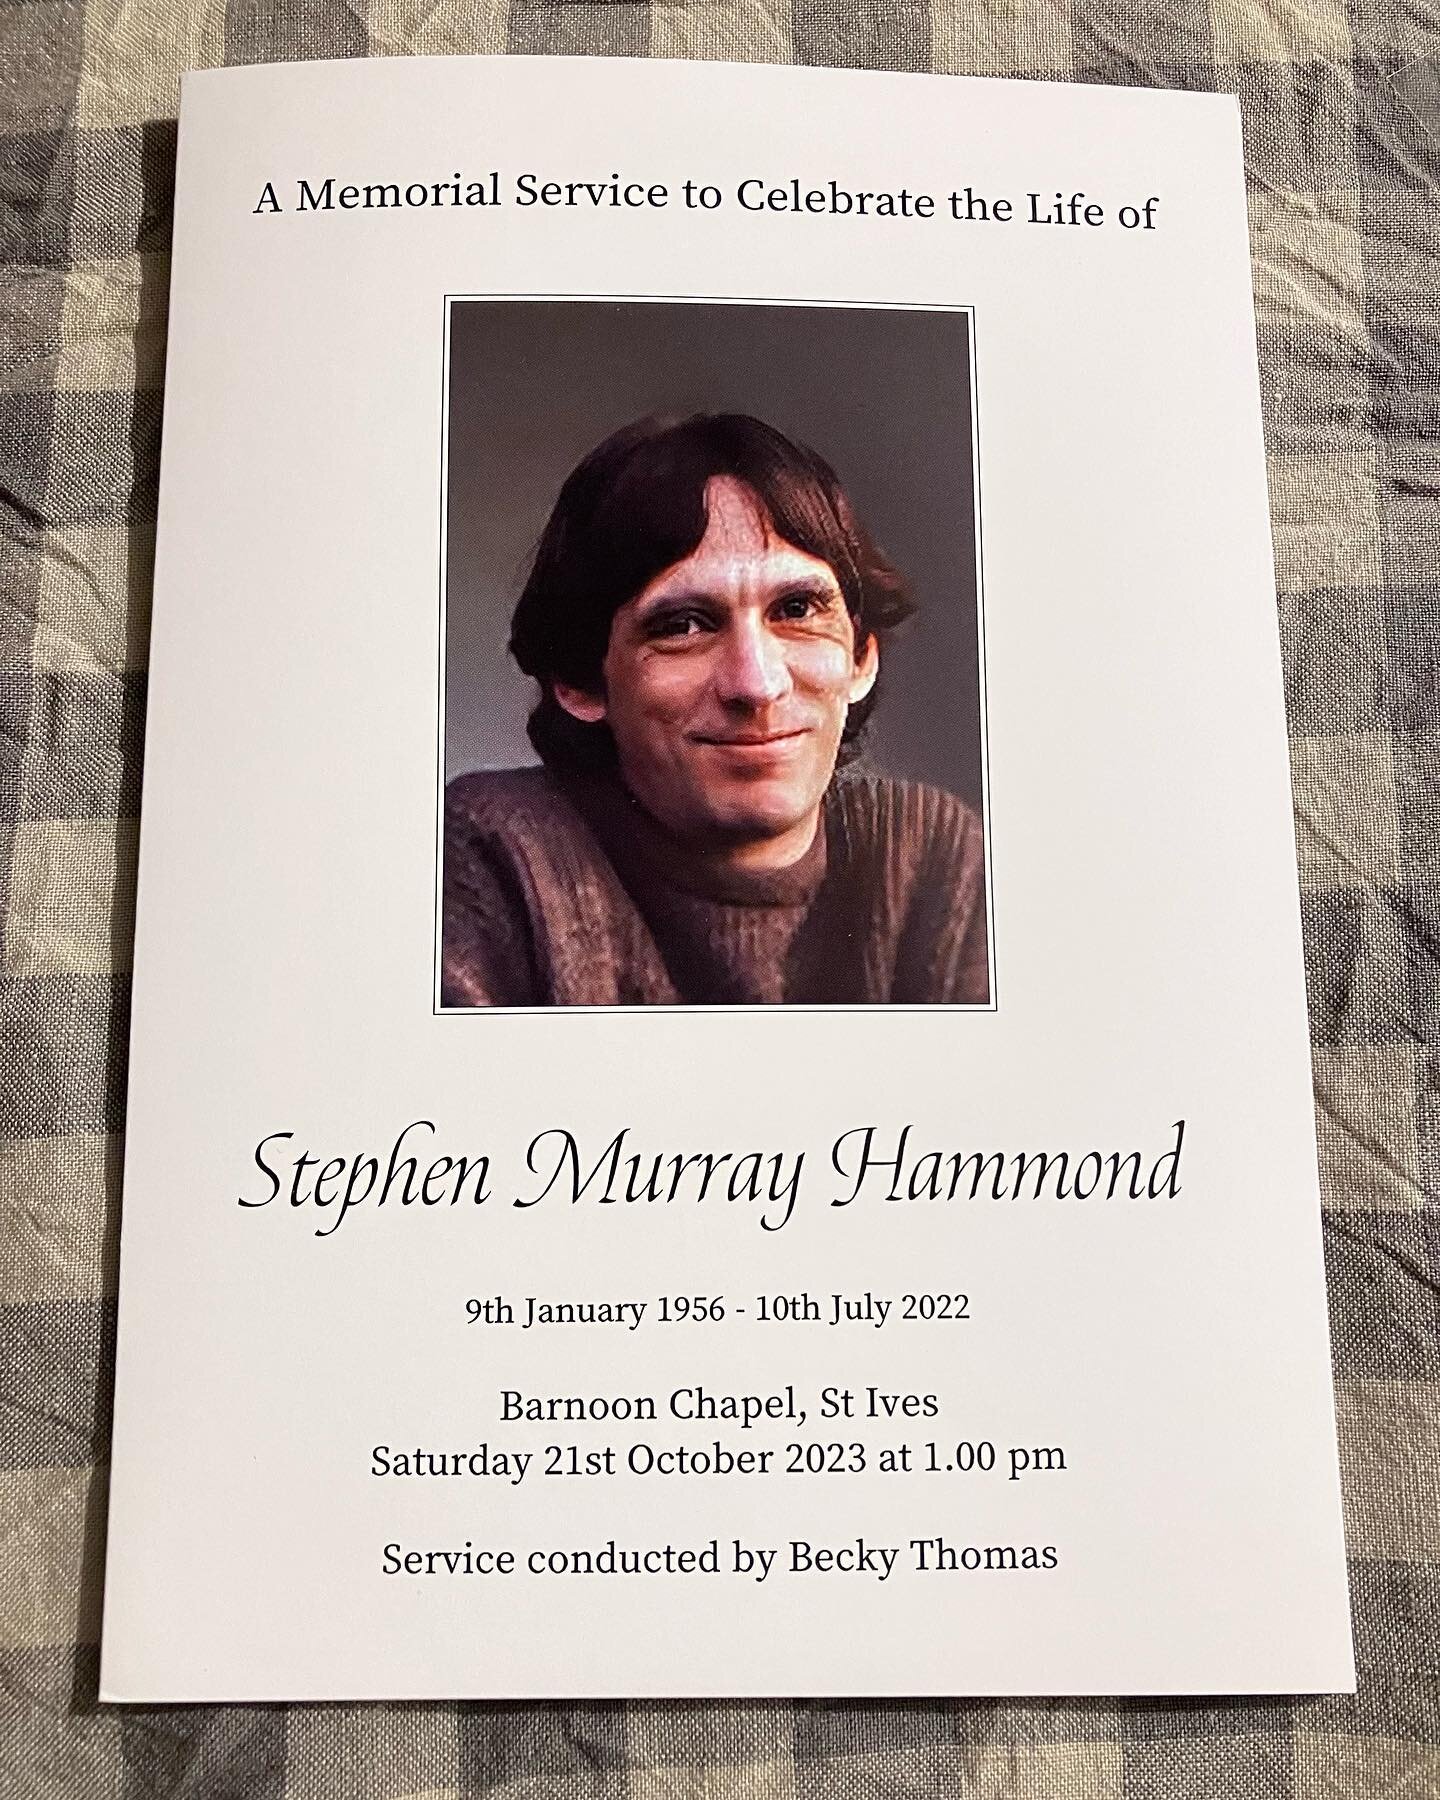 We had a wonderful memorial in a lovely location overlooking Porthmeor Beach to commemorate Stephen&rsquo;s life and legacy. It was great to meet friends from Cambridge and Cornwall who all had their own stories about his intelligence, curiosity and 